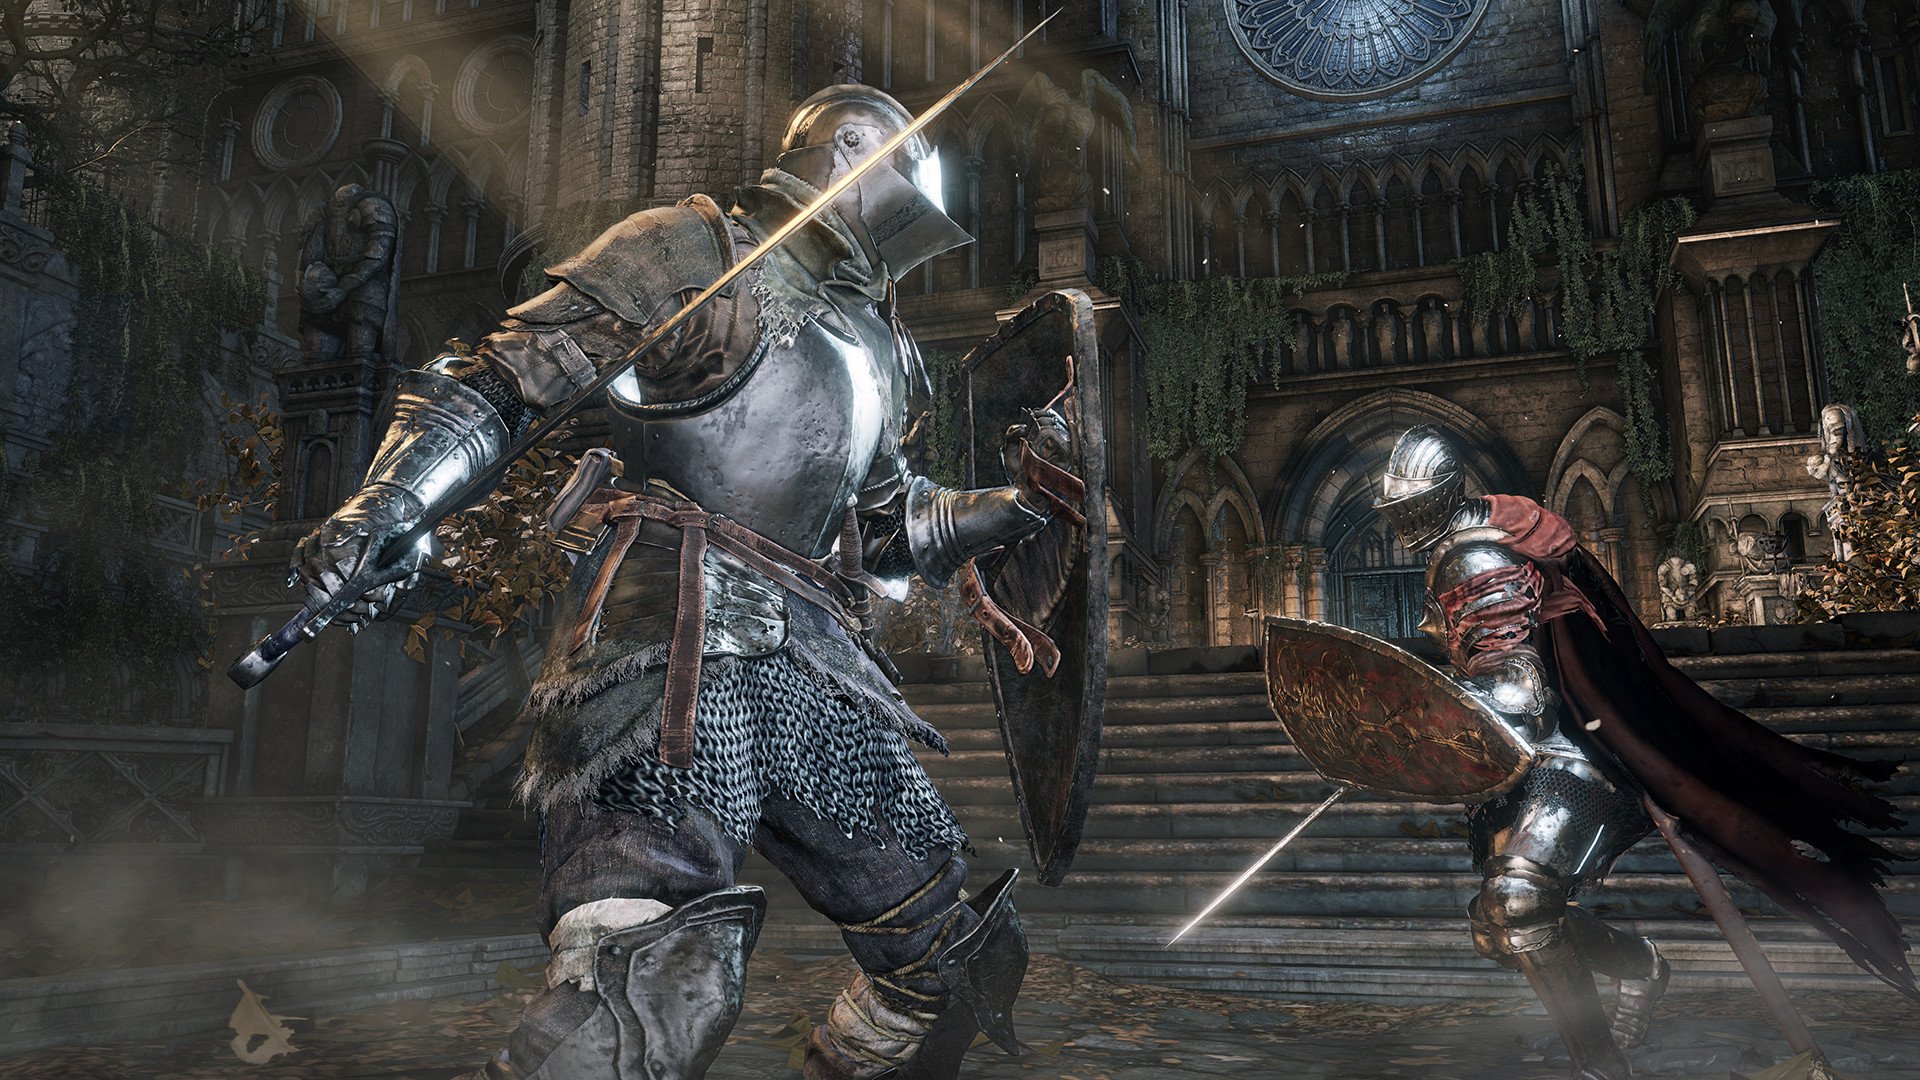 The Dark Souls trilogy's PC servers may be rising from the ashes